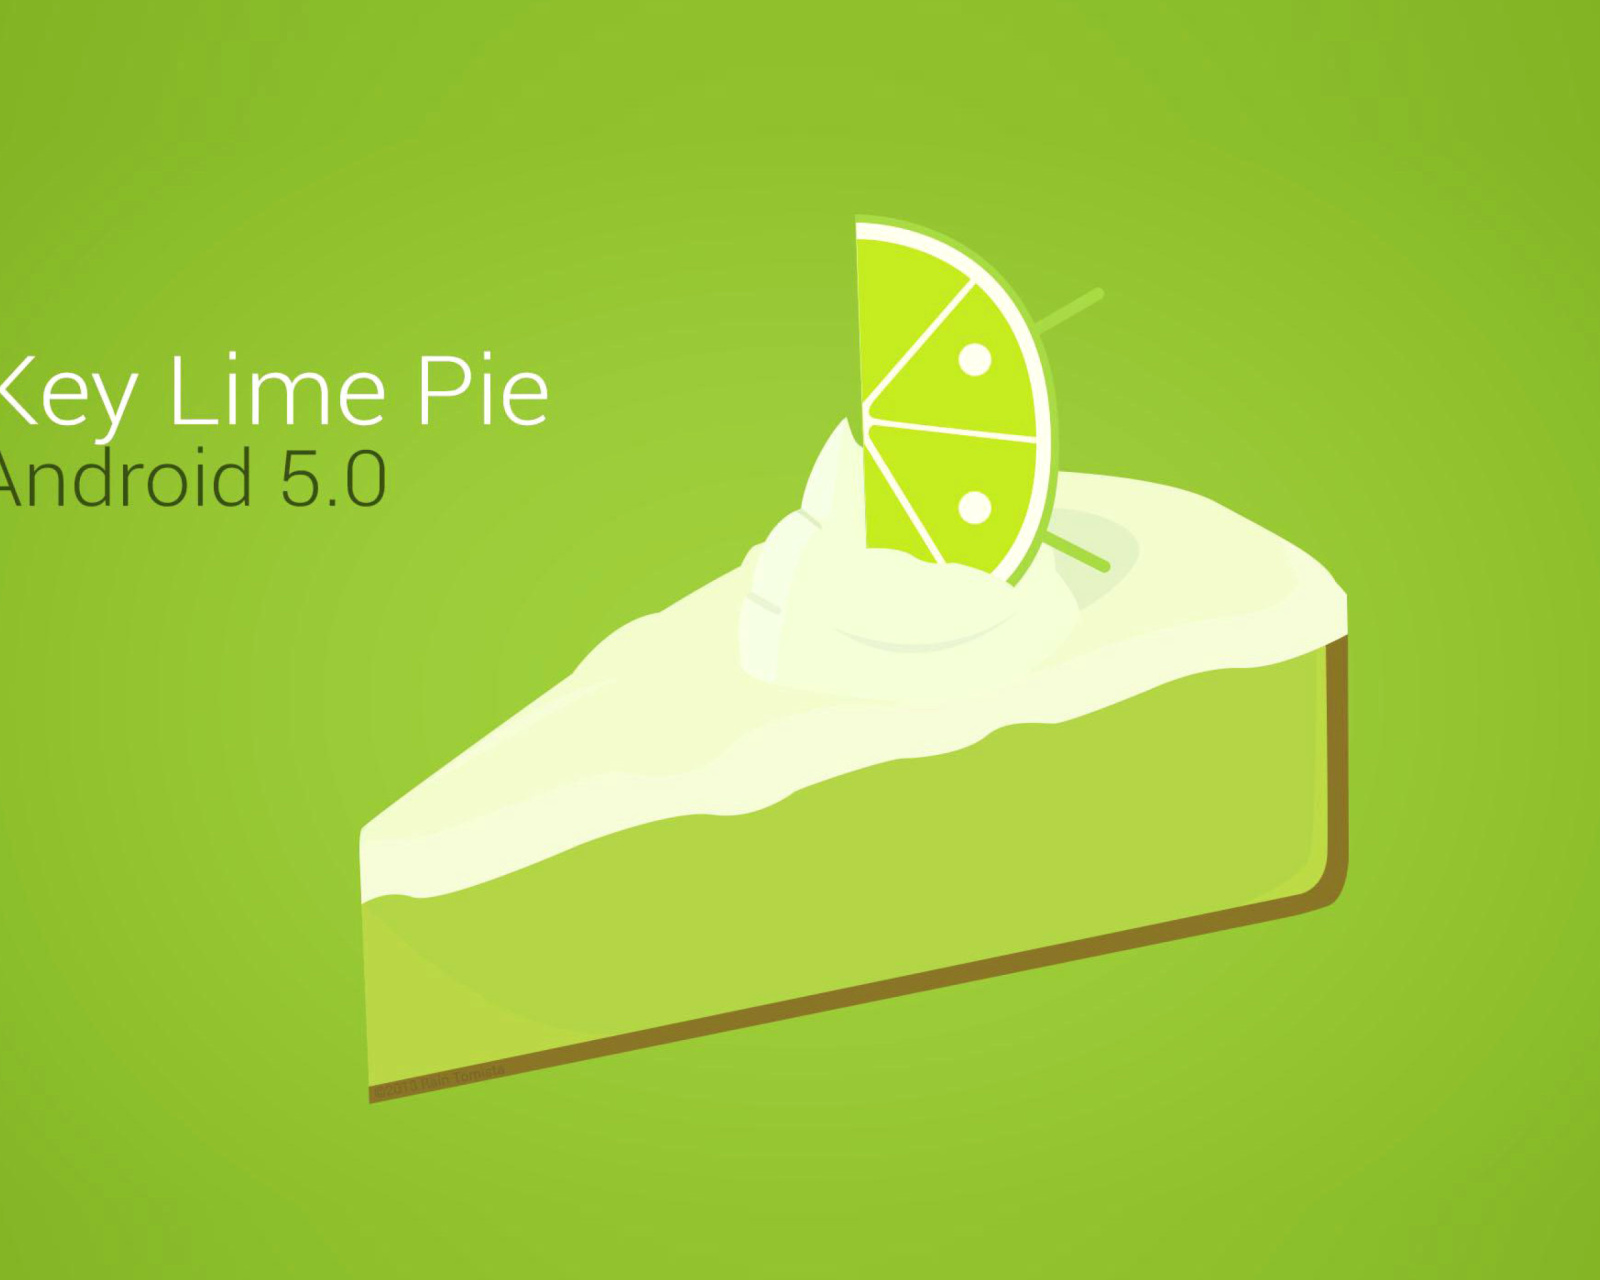 Das Concept Android 5.0 Key Lime Pie Wallpaper 1600x1280